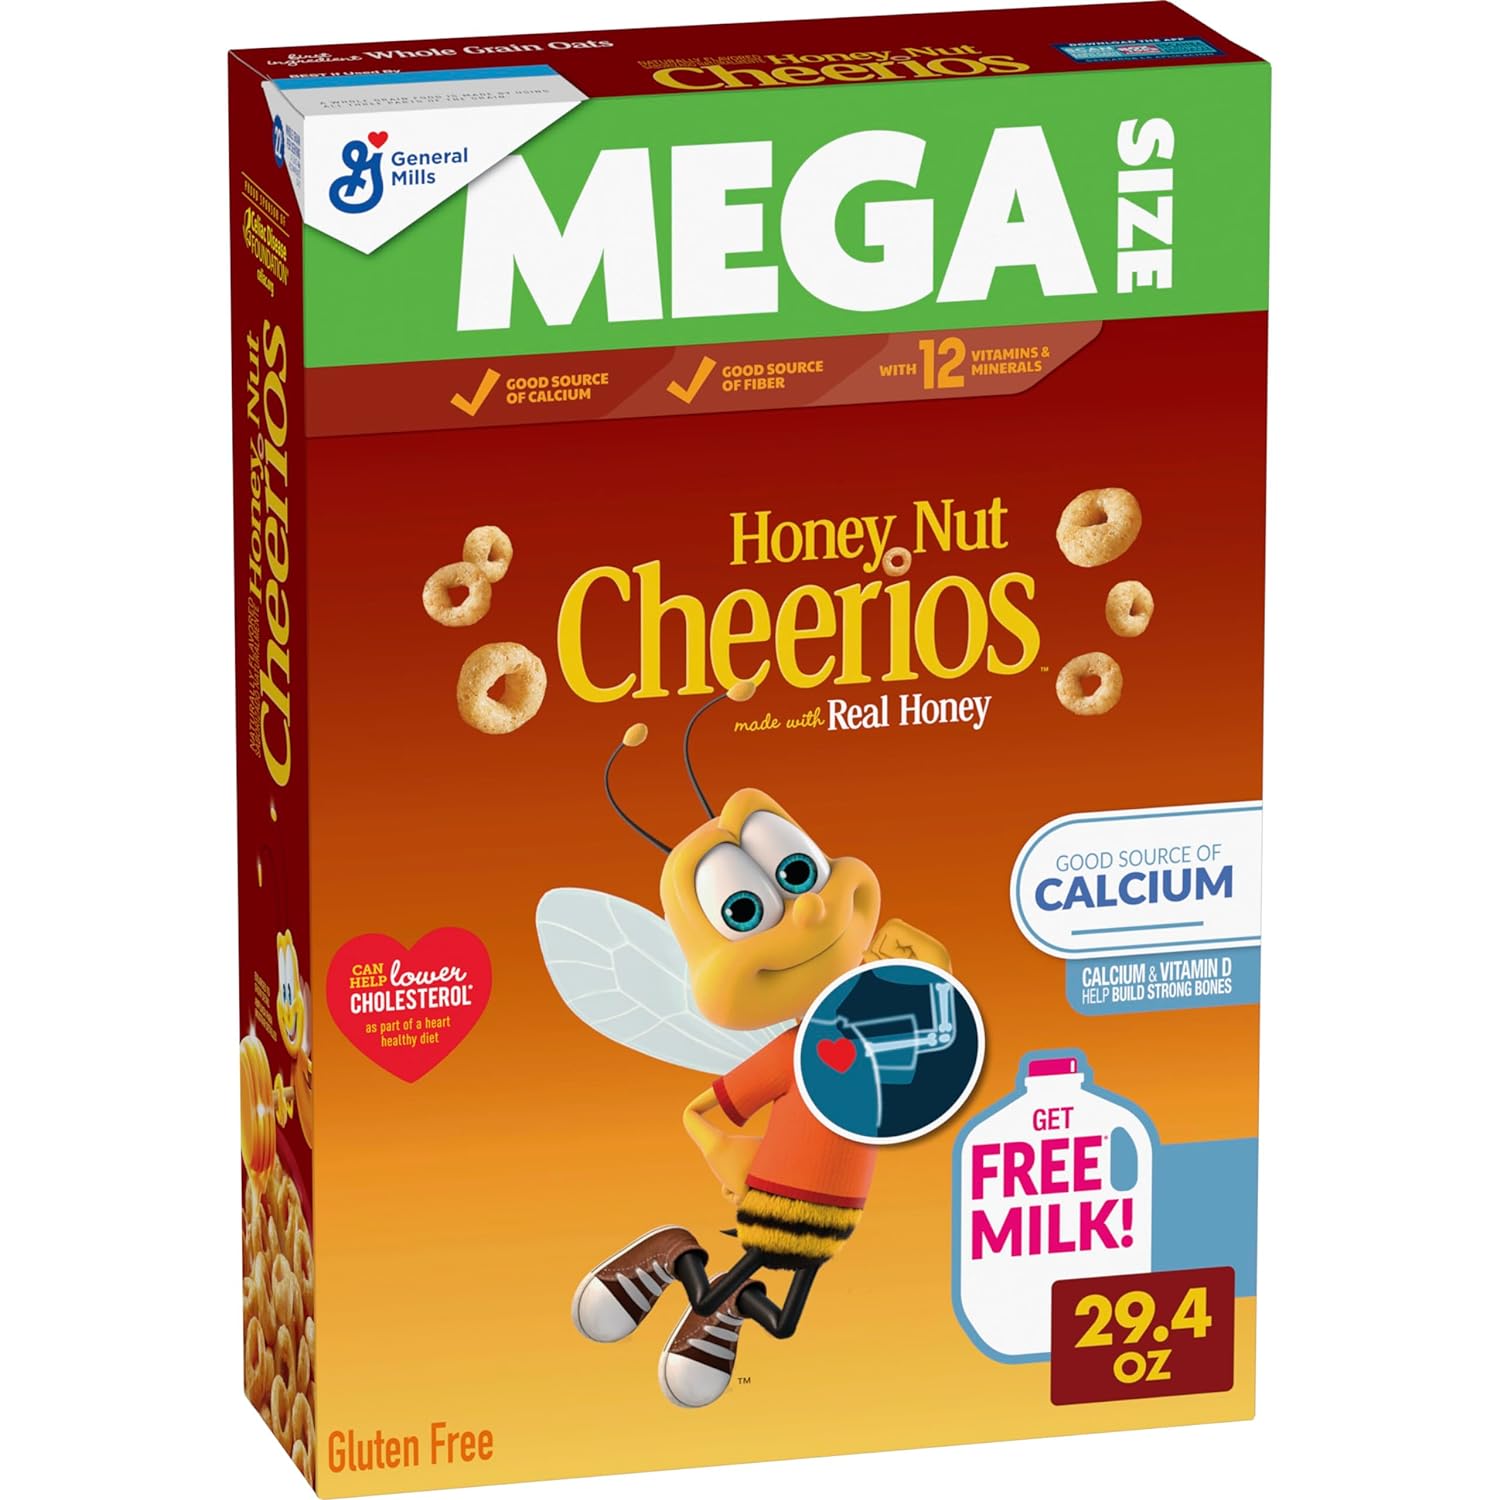 Honey Nut Cheerios Cereal, Limited Edition Happy Heart Shapes, Heart Healthy Cereal With Whole Grain Oats, Mega Size, 29.4 oz